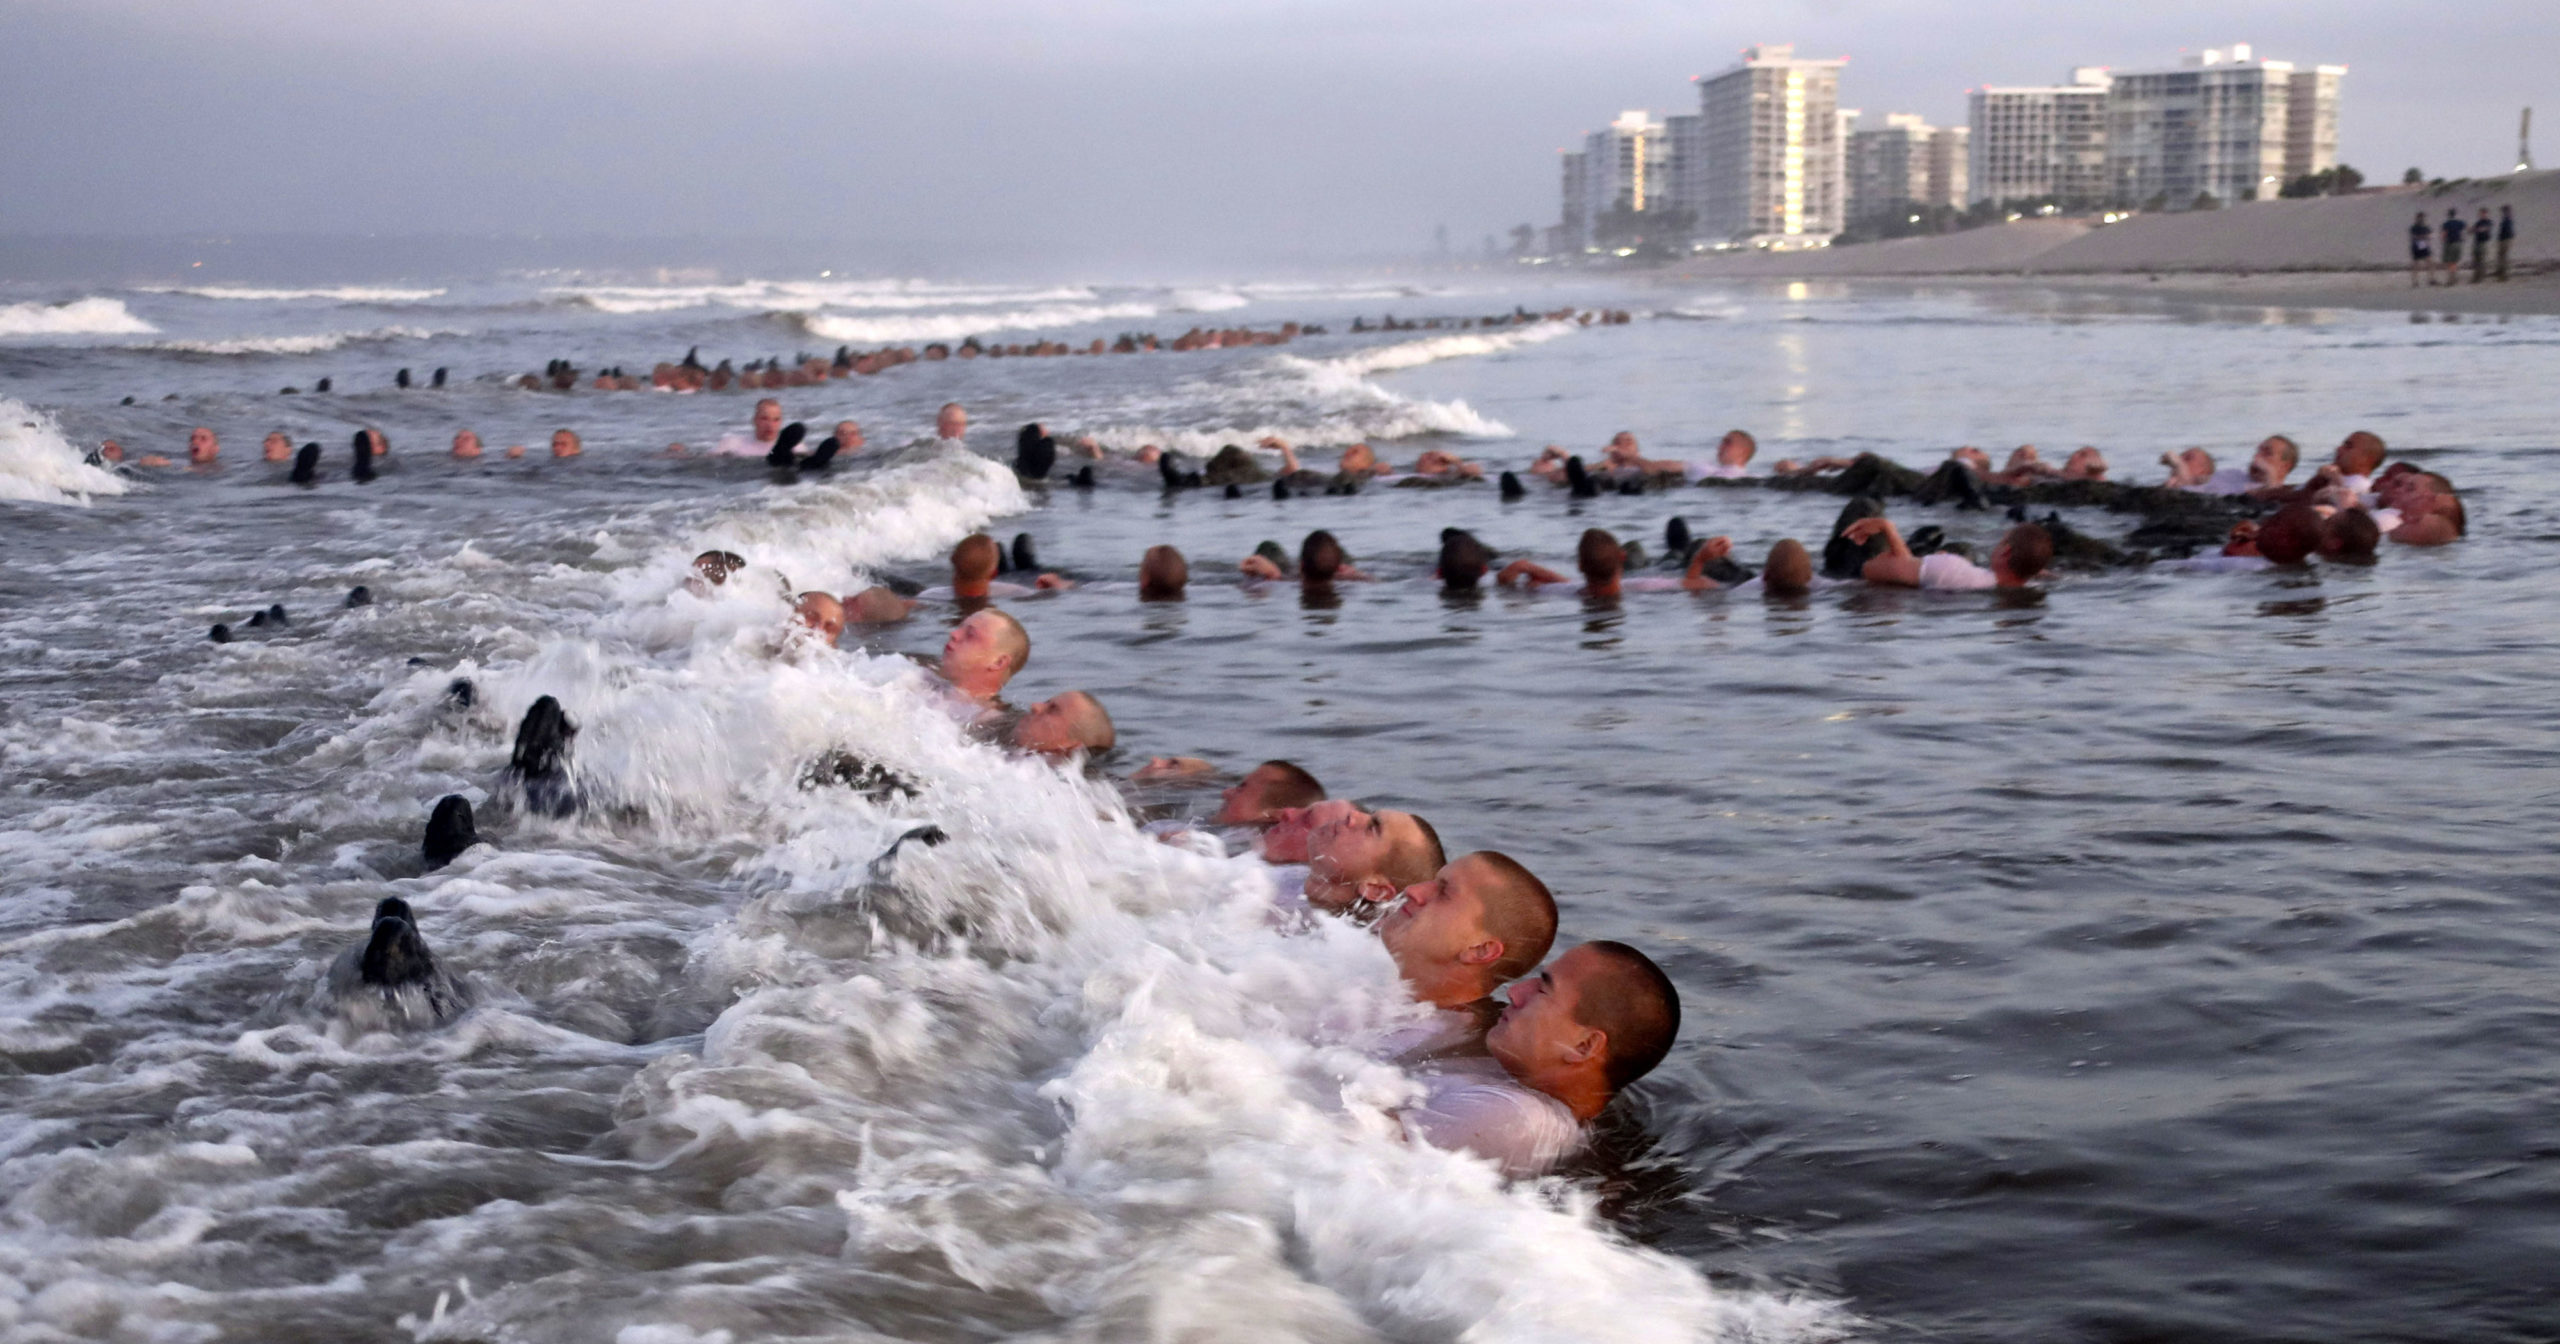 U.S. Navy SEAL candidates participate in training at the Naval Special Warfare Center in Coronado, California, on May 4, 2020.